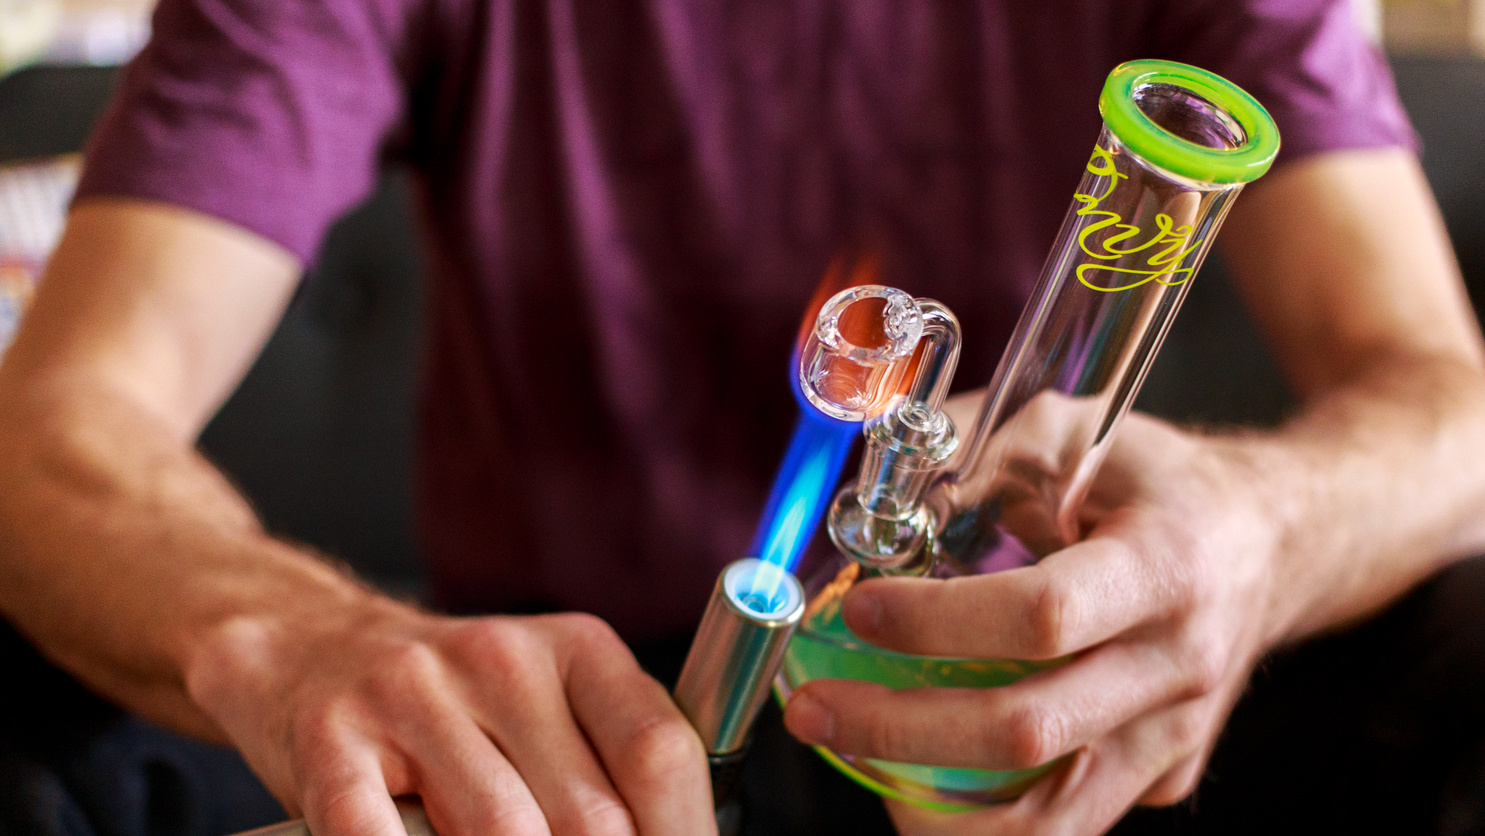 Top 7 Best Dab Accessories and Tools in 2023